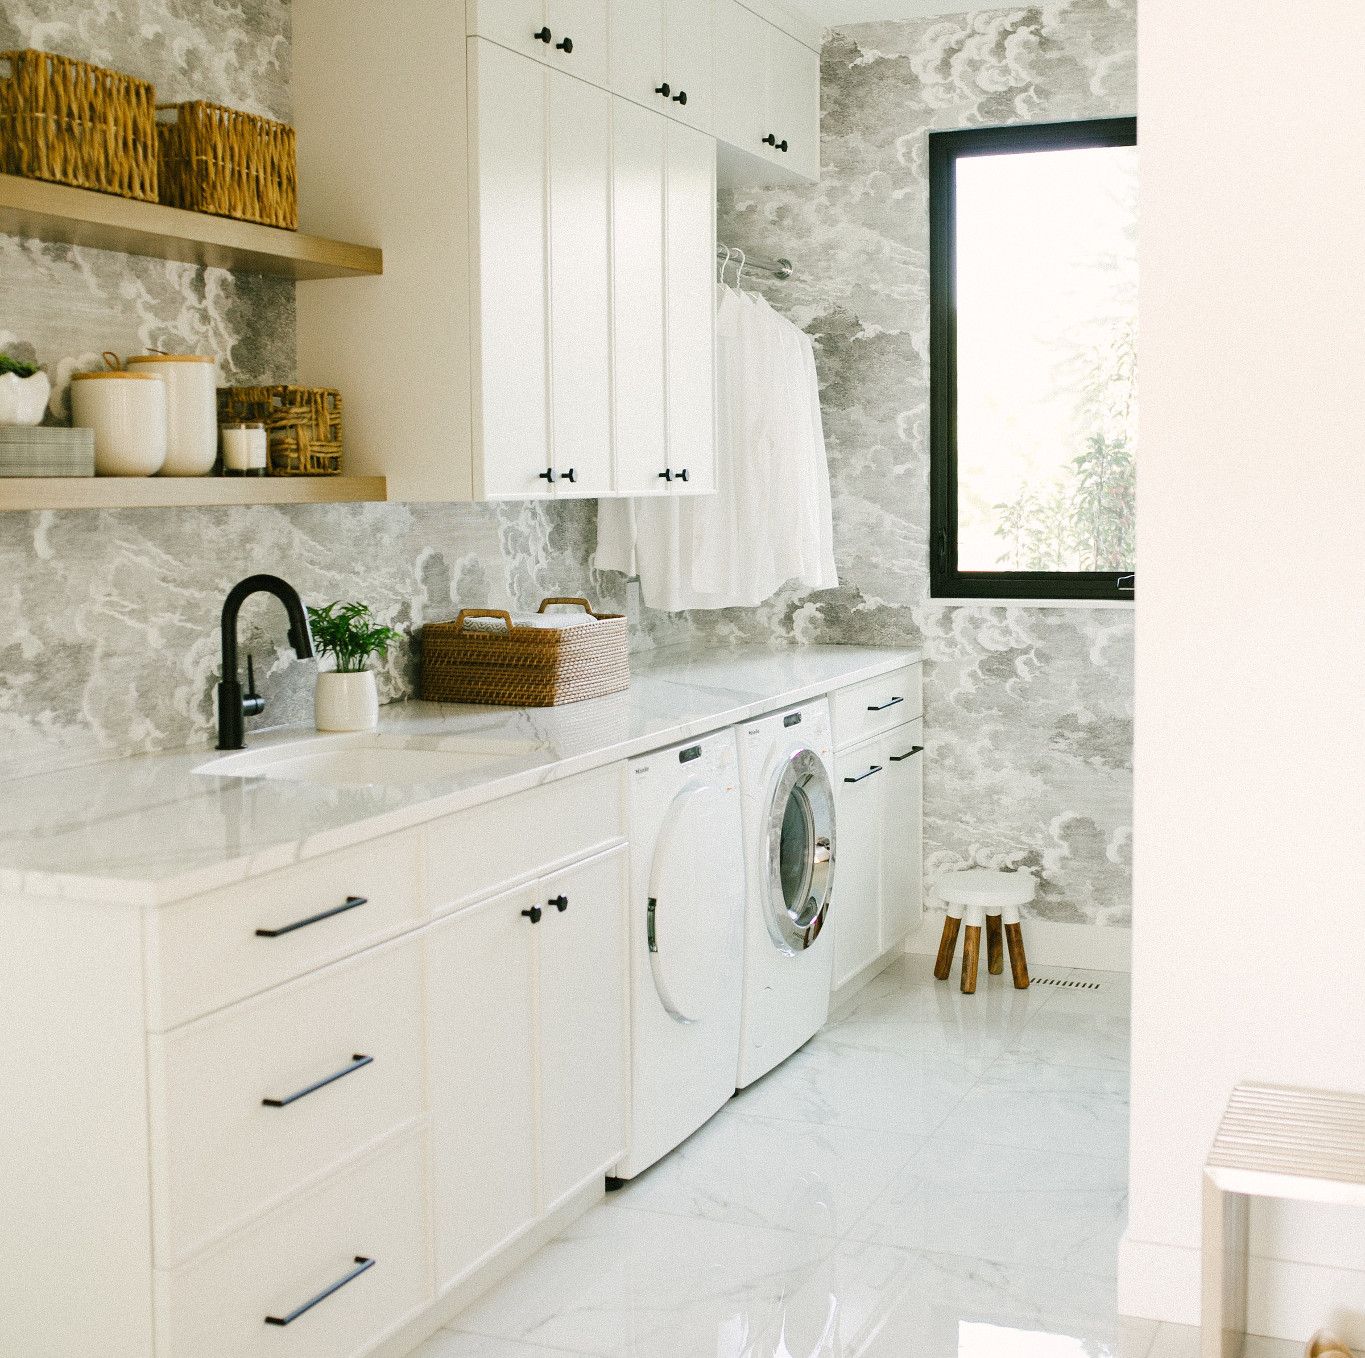 a glistening white laundry room with white countertops, Cambria Brittanicca quartz countertops, open wooden shleving, a sink, and lots of storage space.